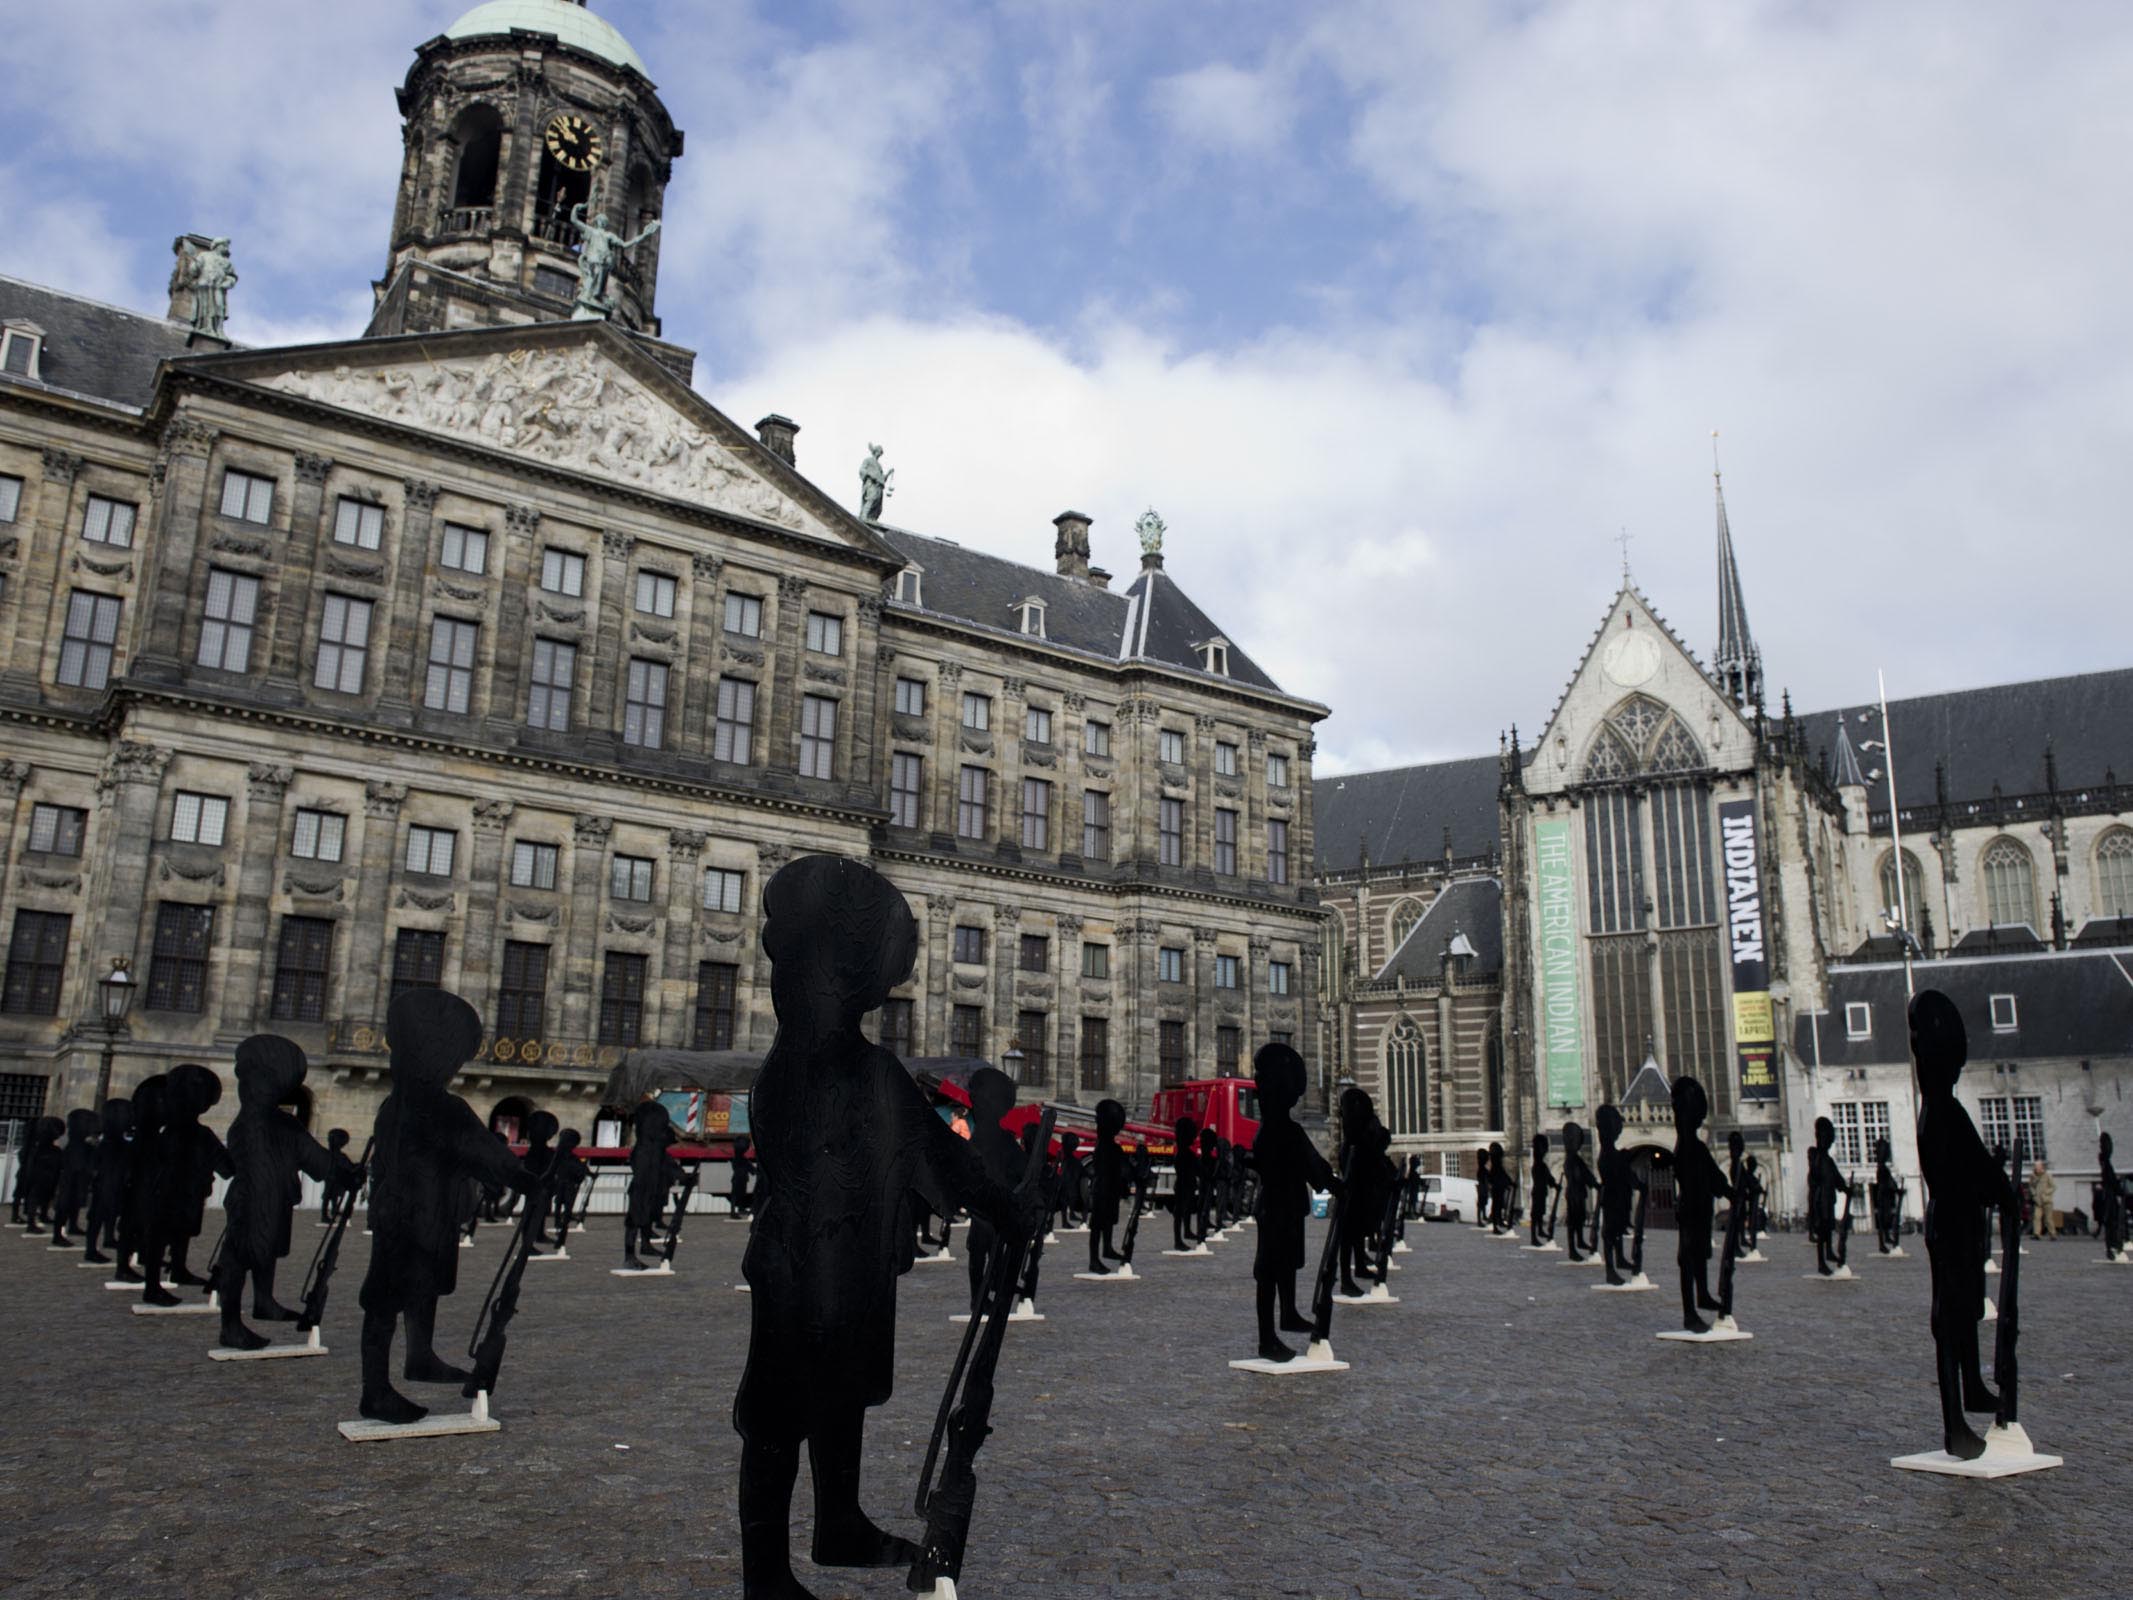 army of child soldier puppets designed by Claudia Hansen on the Amsterdam Dam square